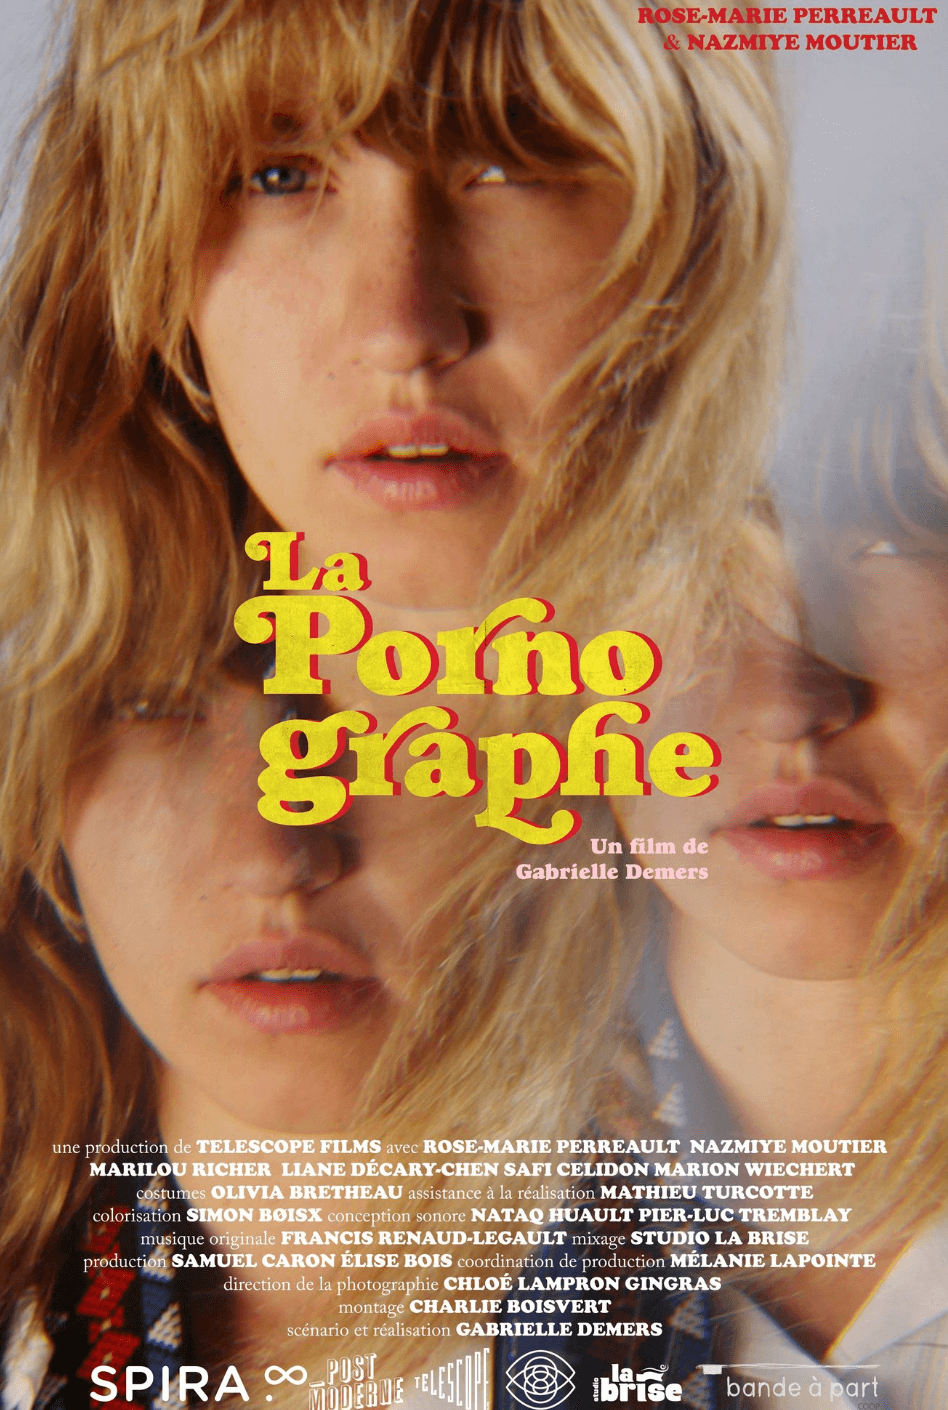 images/bottin_films/214ce02a0c16e6cf48fc45e8c7661c91-La-pornographe-affiche.png#joomlaImage://local-images/bottin_films/214ce02a0c16e6cf48fc45e8c7661c91-La-pornographe-affiche.png?width=948&height=1410